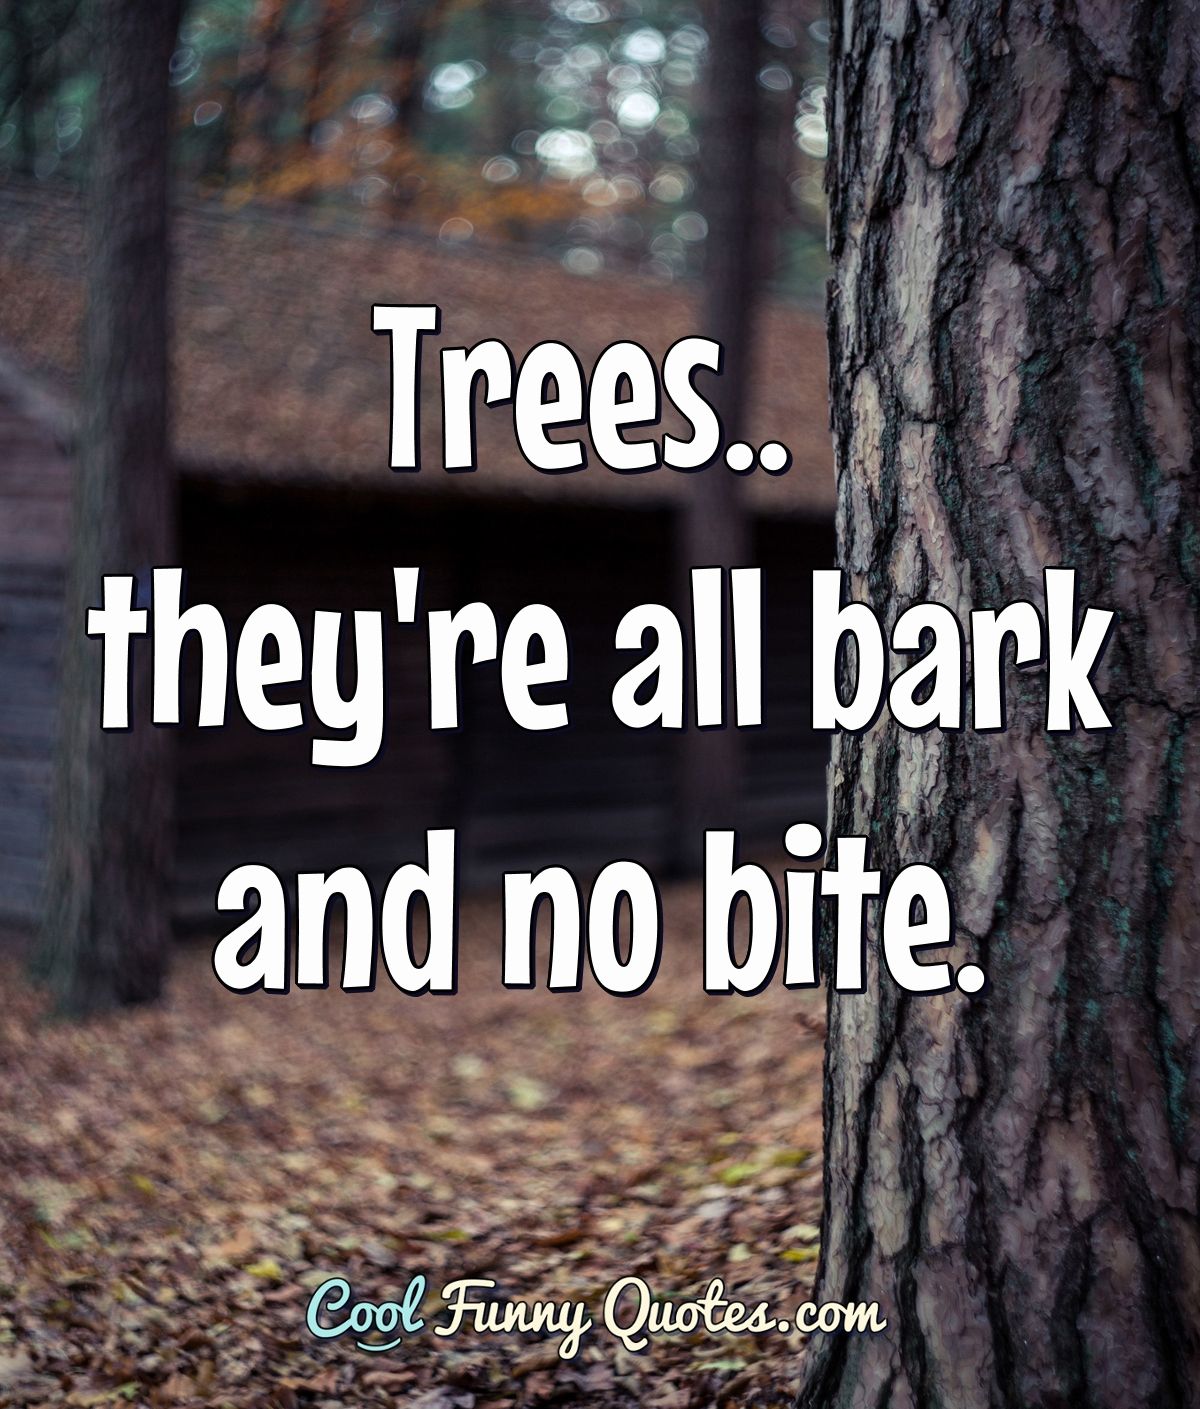 Trees.. they're all bark and no bite. - Anonymous